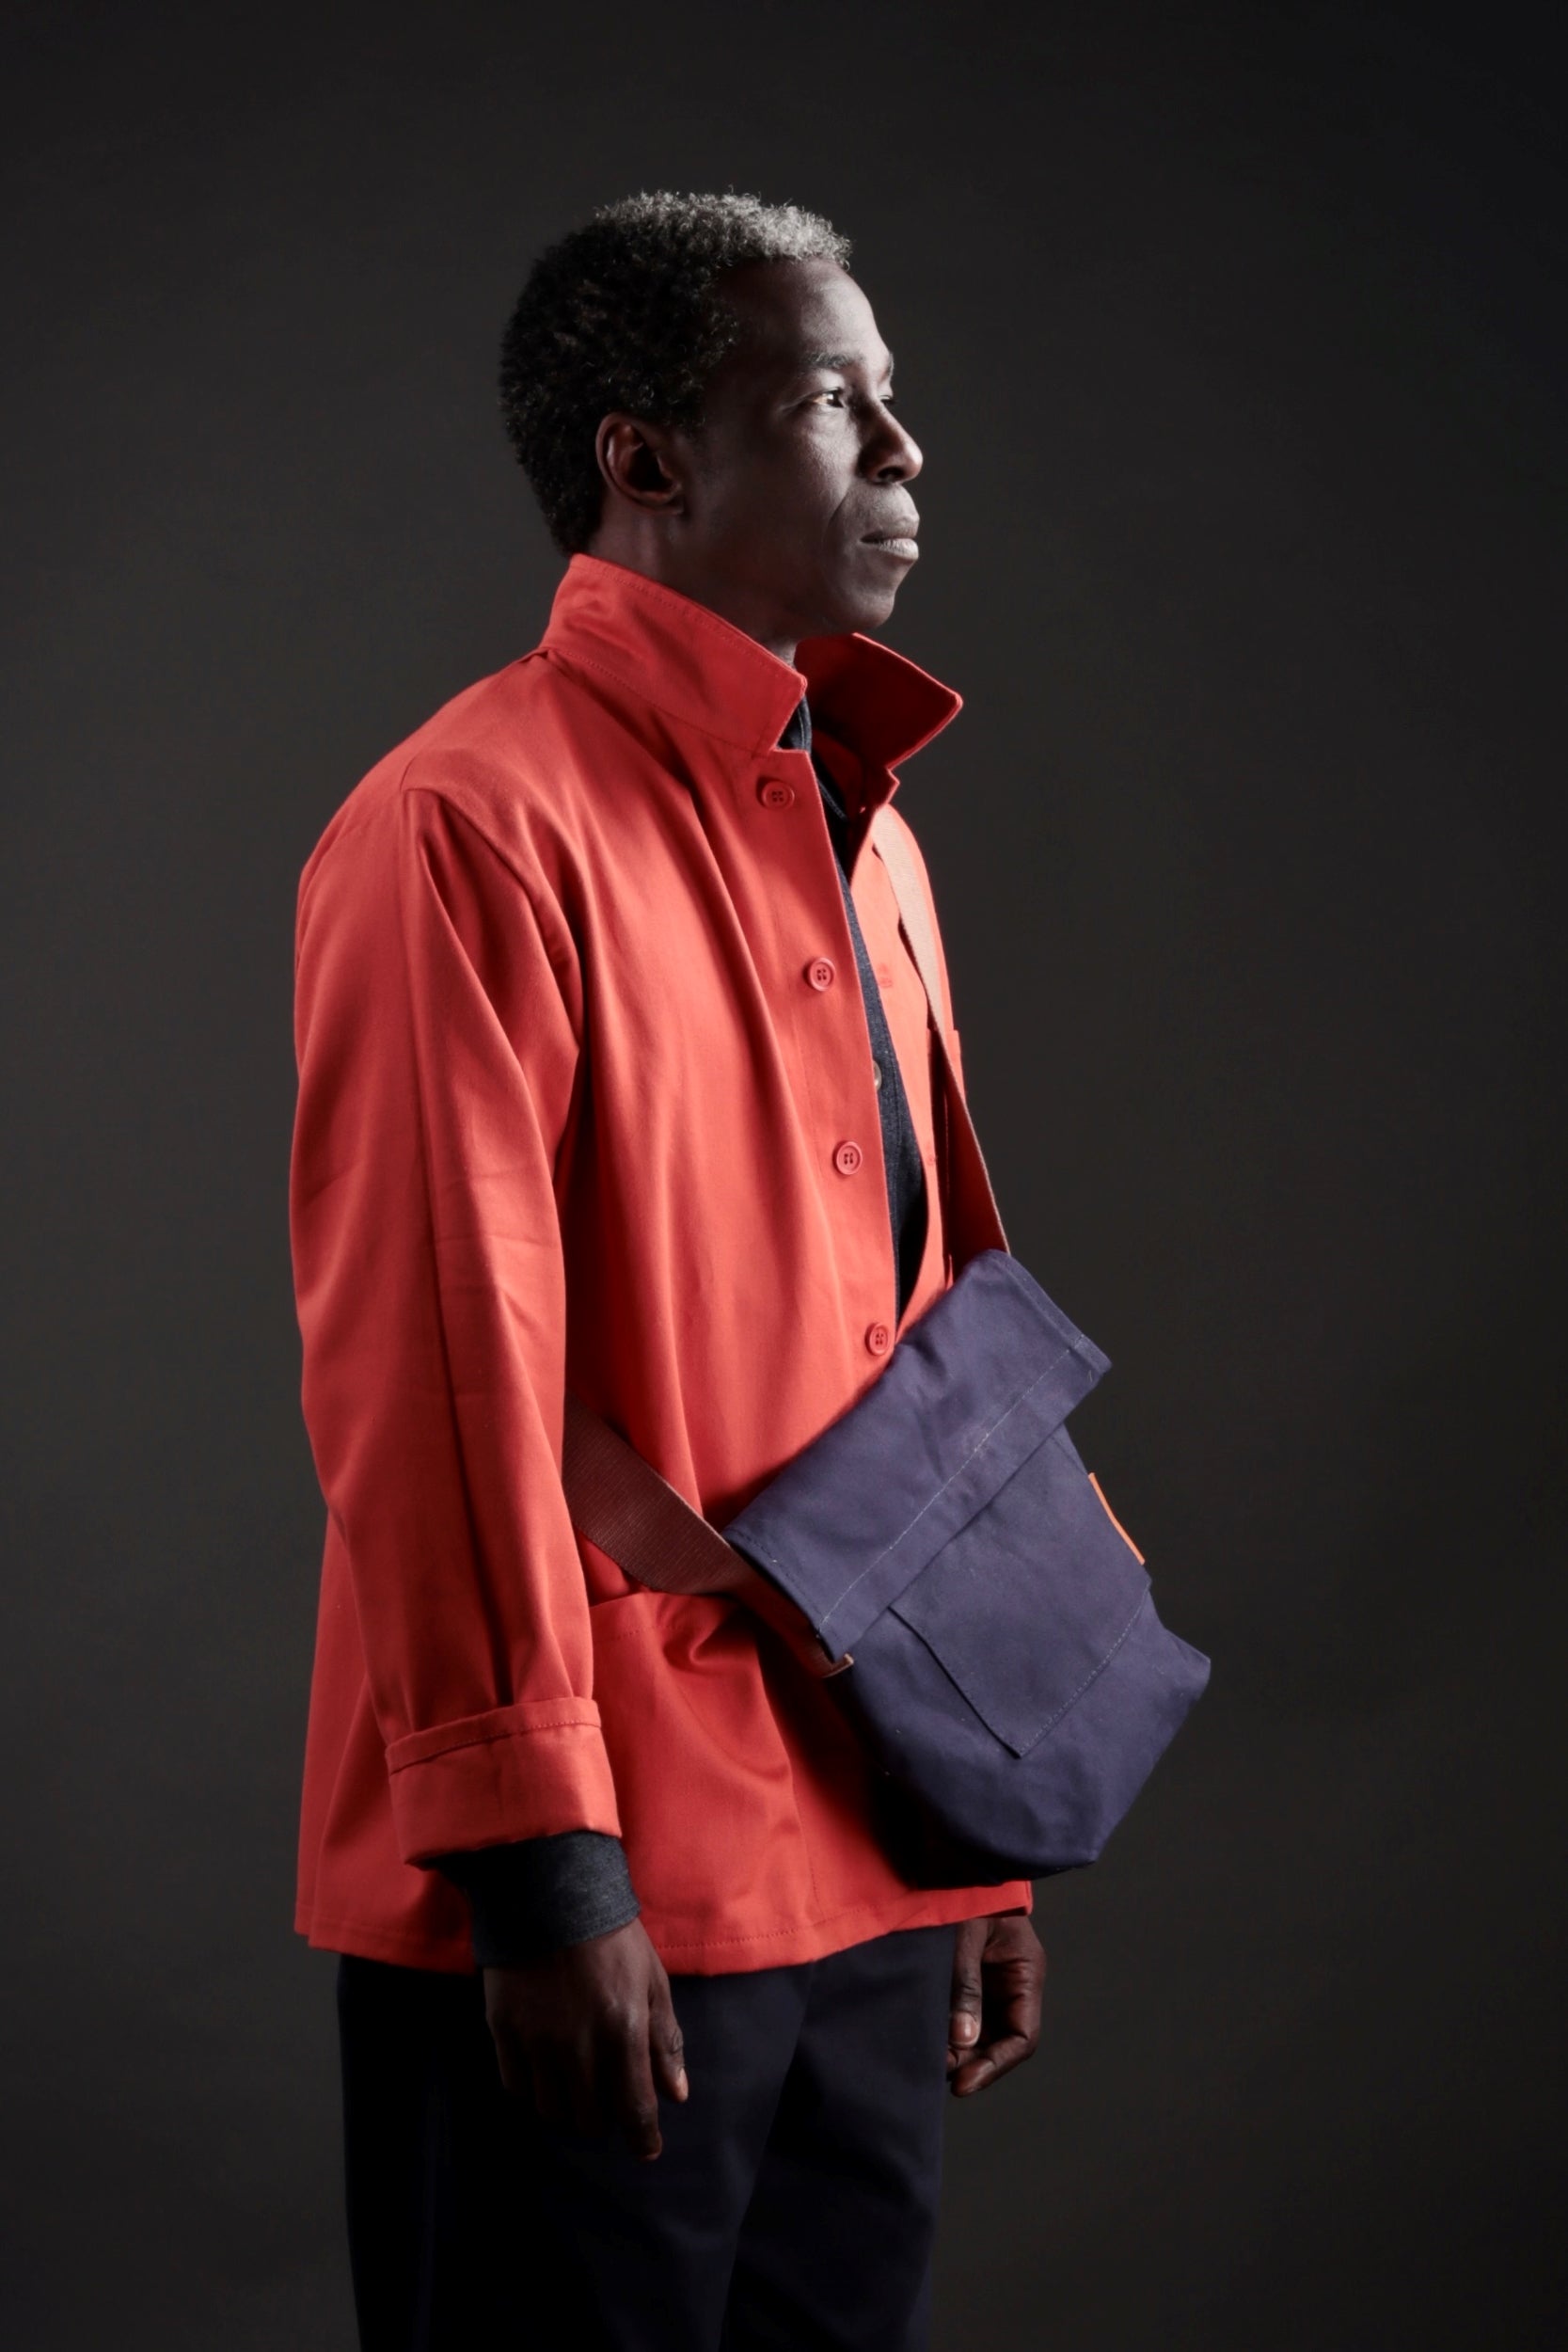 Man carries a Carrier Company Canvas Satchel in Navy